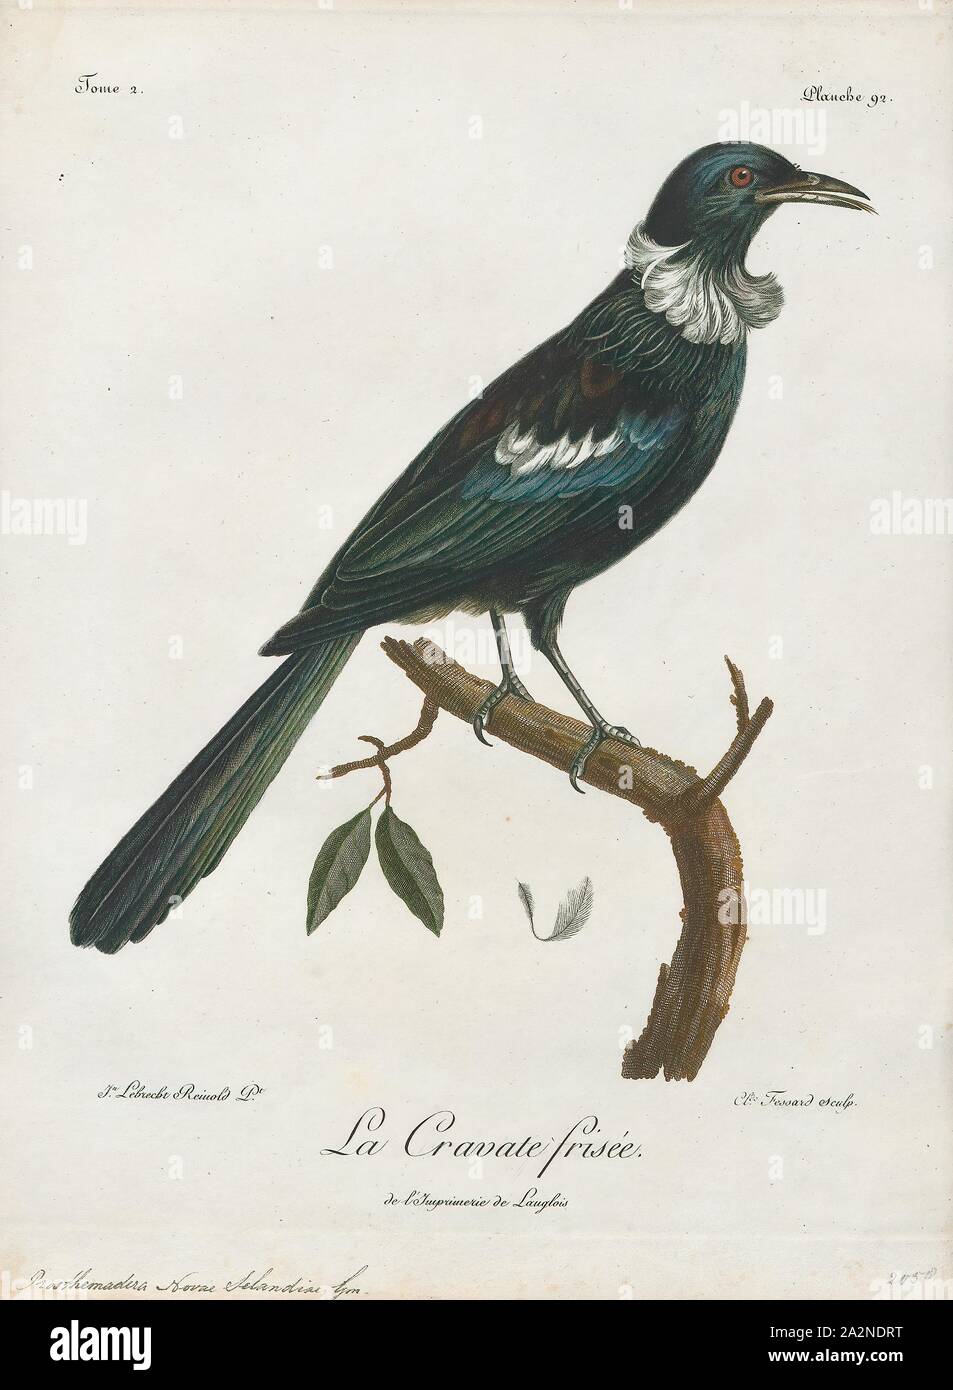 Prosthemadera novae seelandiae, Print, The tui is an endemic passerine bird  of New Zealand, and the only species in the genus Prosthemadera. It is one  of the largest species in the diverse